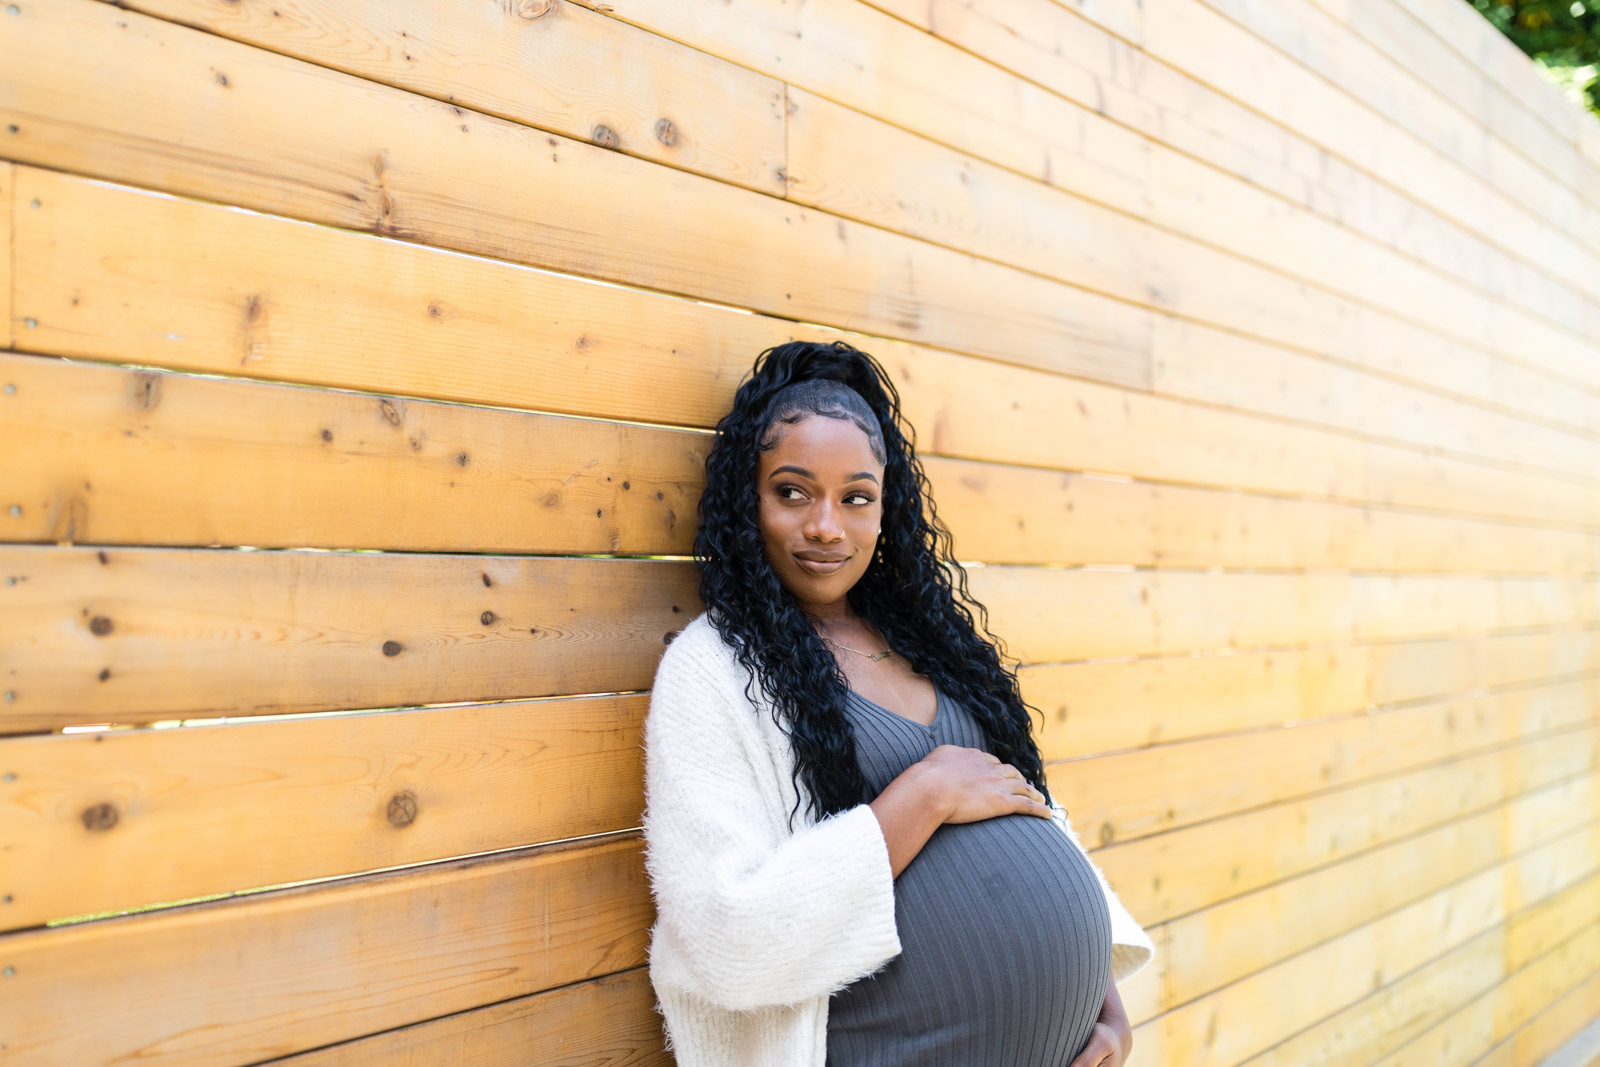 Black, pregnant woman with long hair leaning against a fence.